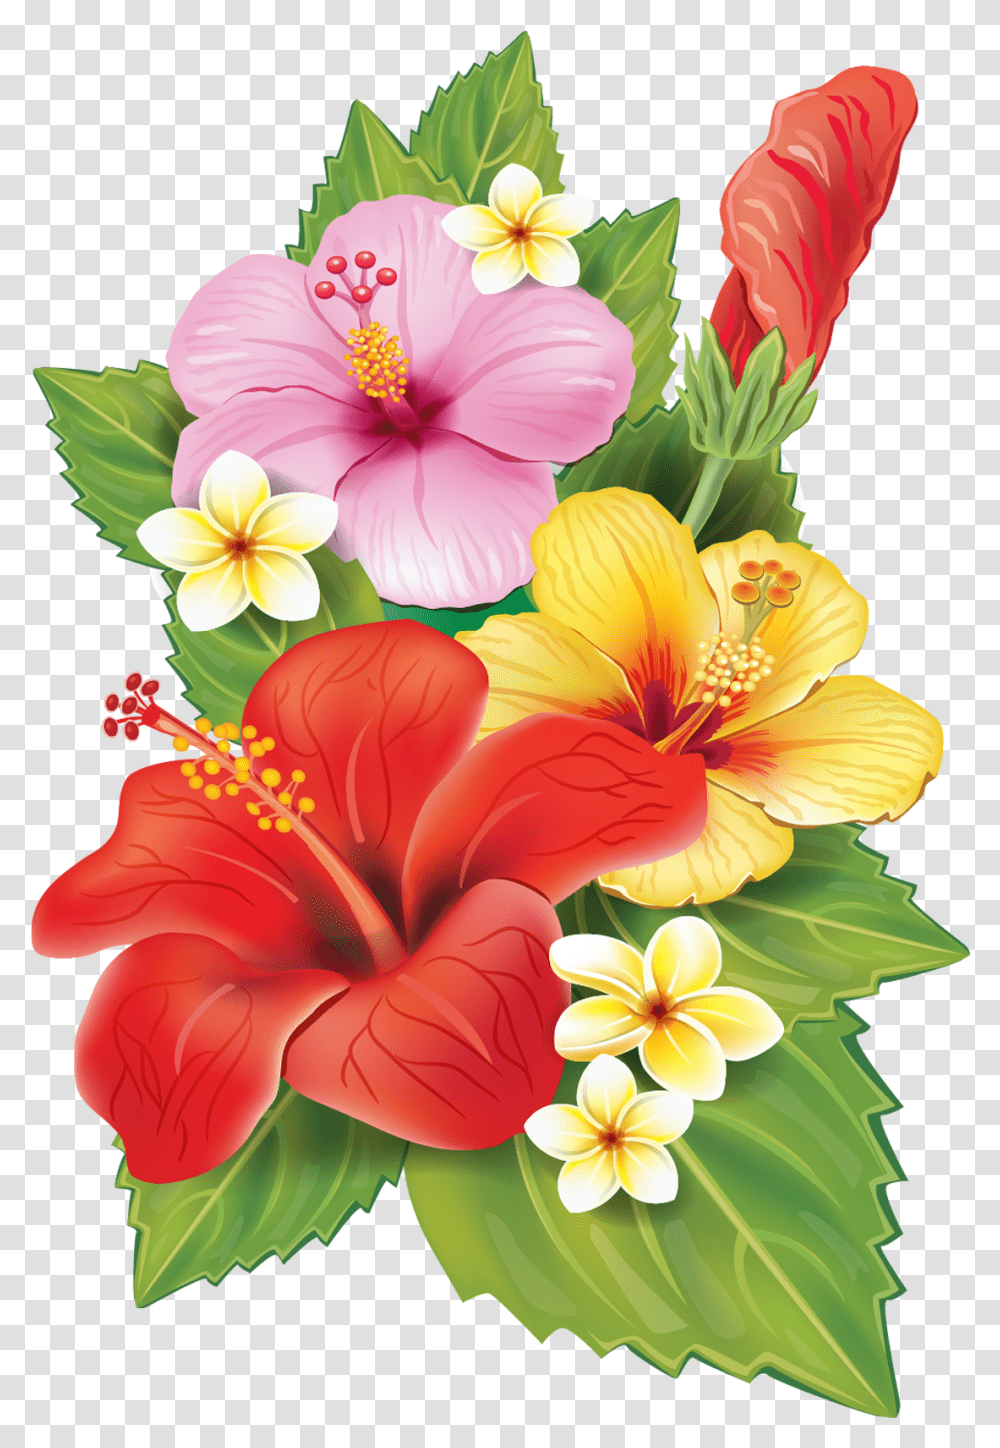 Tropical Flower Illustration Free Background Tropical Flowers, Plant, Hibiscus, Blossom, Anther Transparent Png